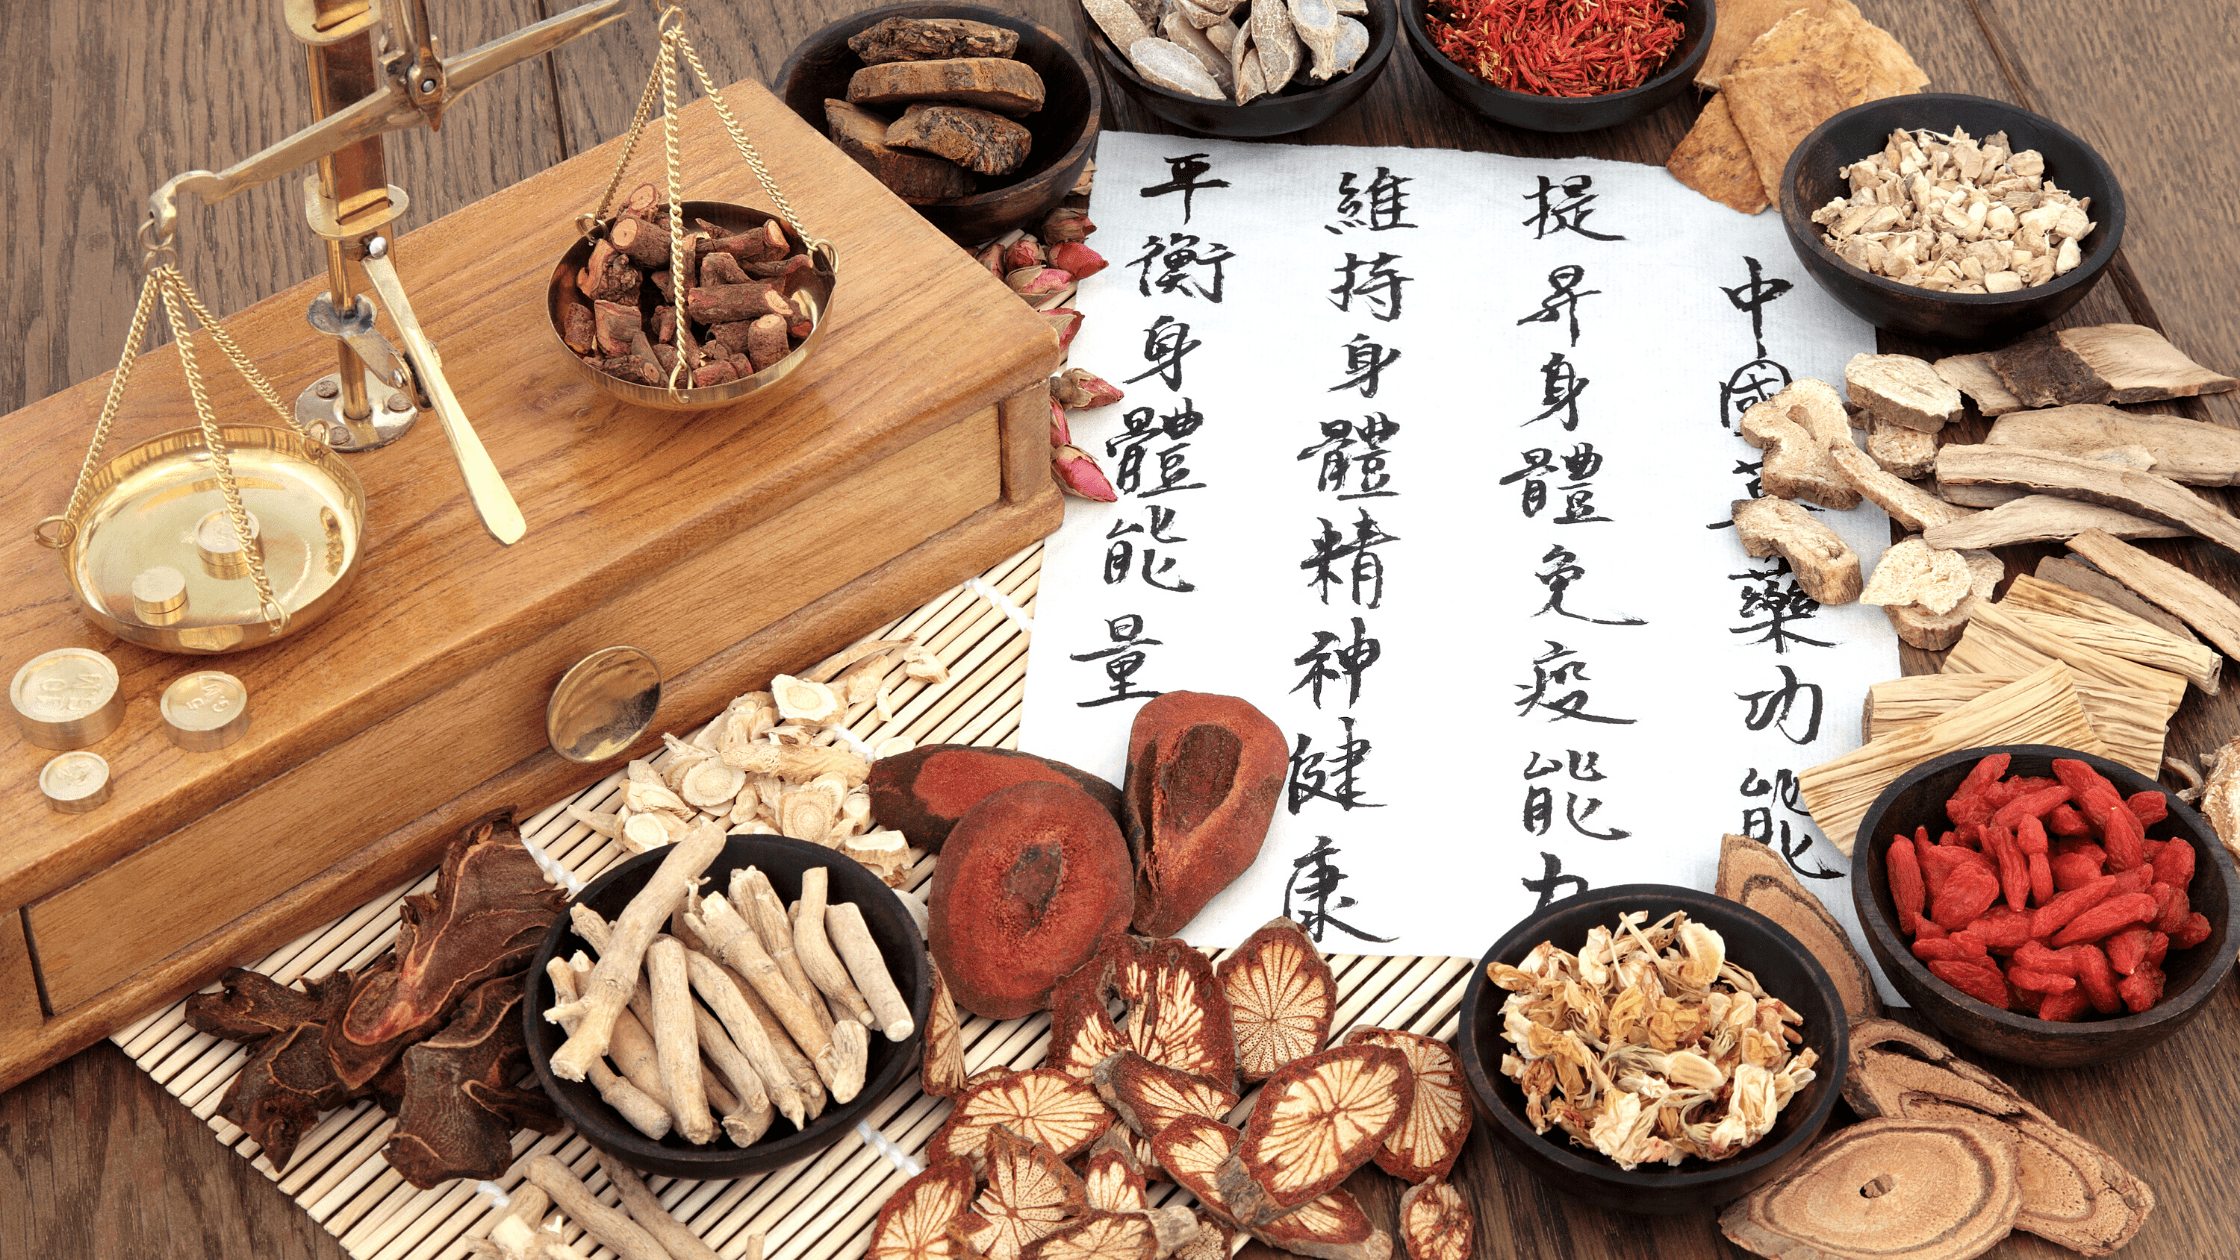 History of Wellness blog header, featuring Chinese herbal remedies, a balance scale, and Chinese text